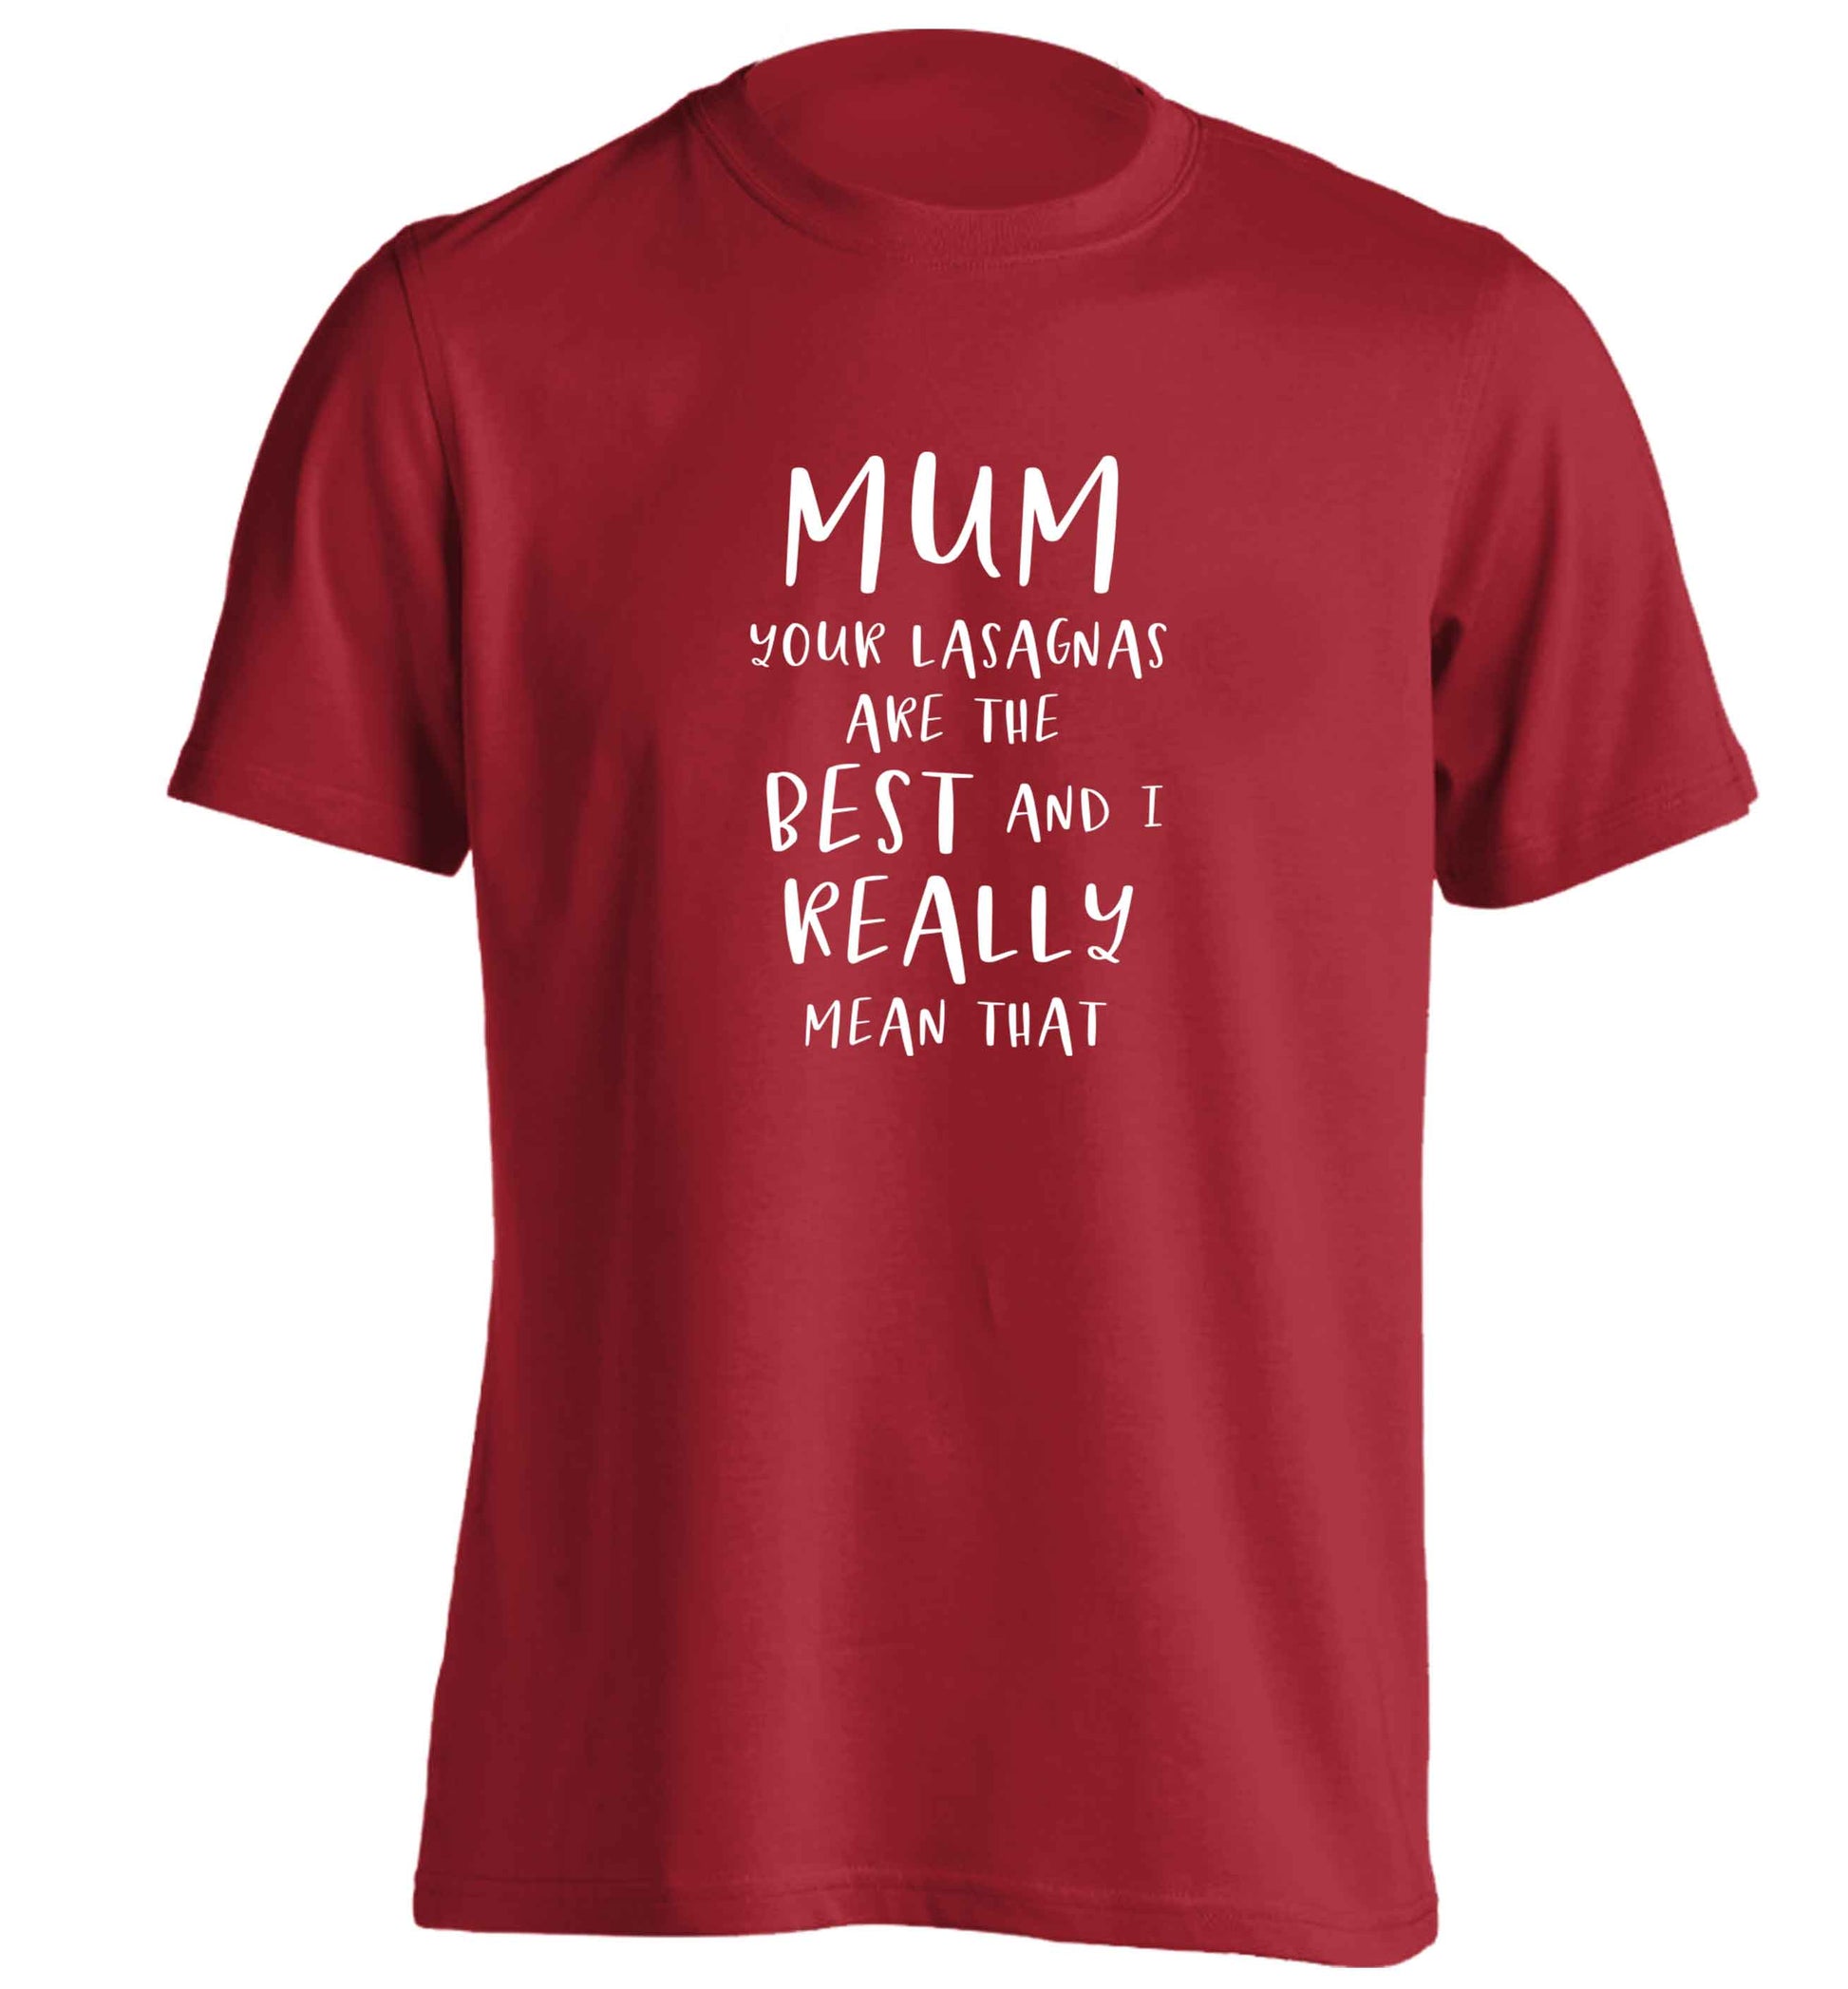 Funny gifts for your mum on mother's dayor her birthday! Mum your lasagnas are the best and I really mean that adults unisex red Tshirt 2XL